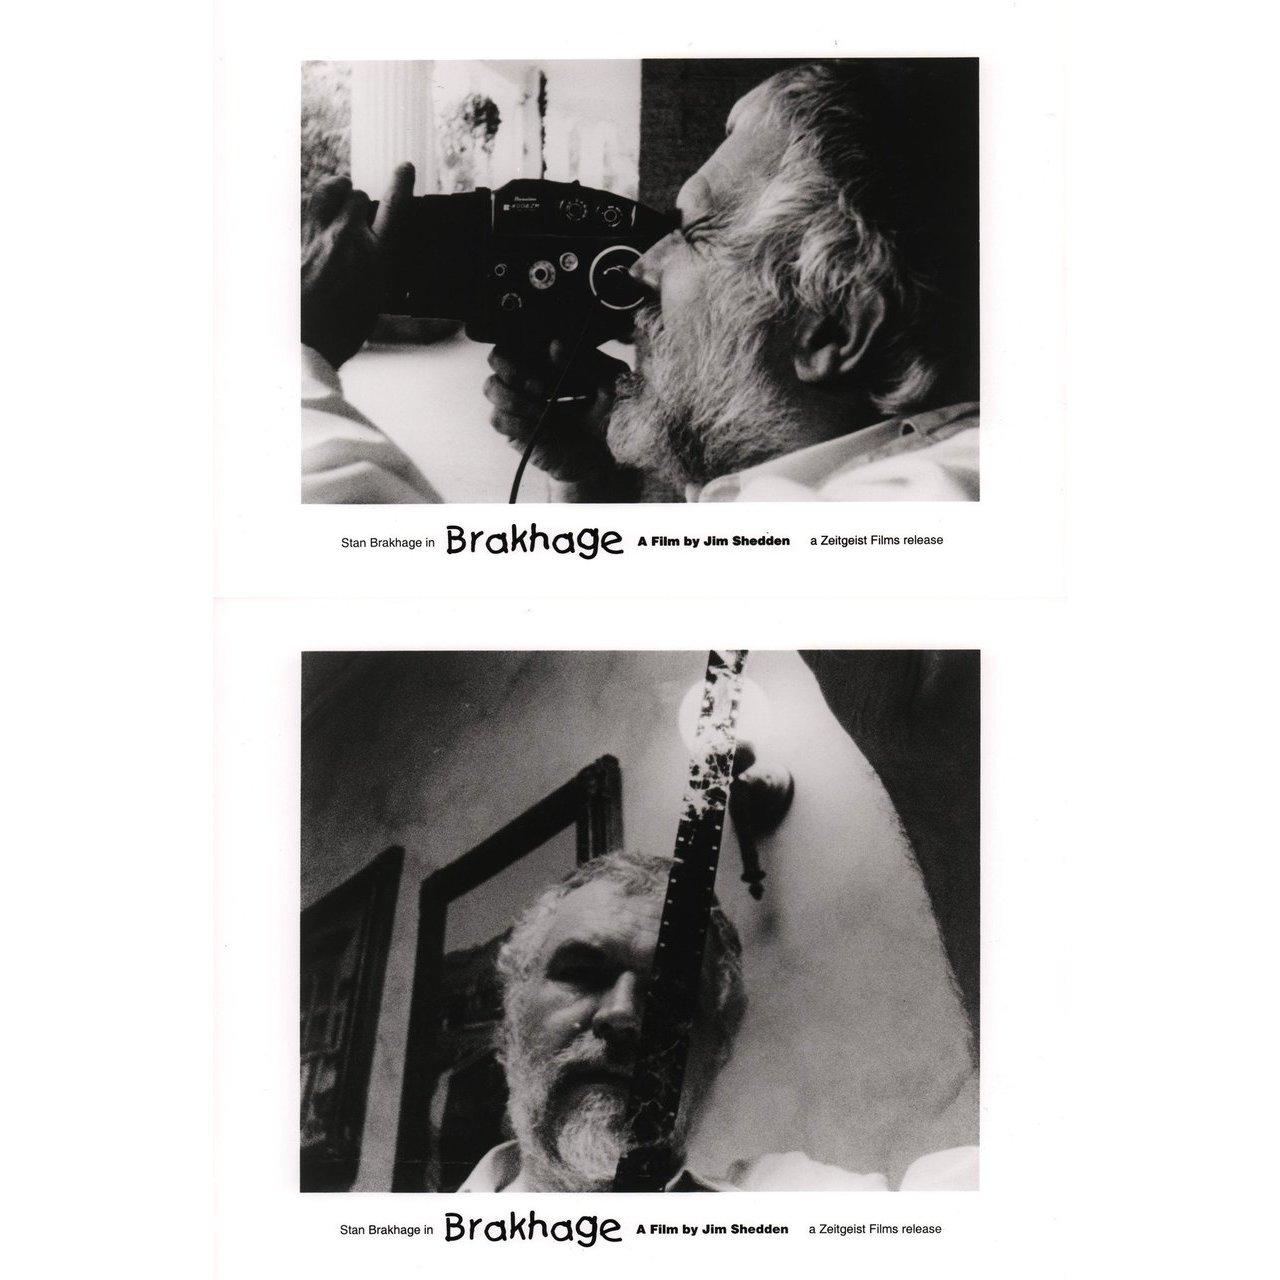 Original 1998 U.S. silver gelatin single-weight photo for the documentary film Brakhage directed by Jim Shedden with Jerry Aronson / Jane Brakhage / Marilyn Brakhage / Stan Brakhage. Fine condition. Please note: the size is stated in inches and the